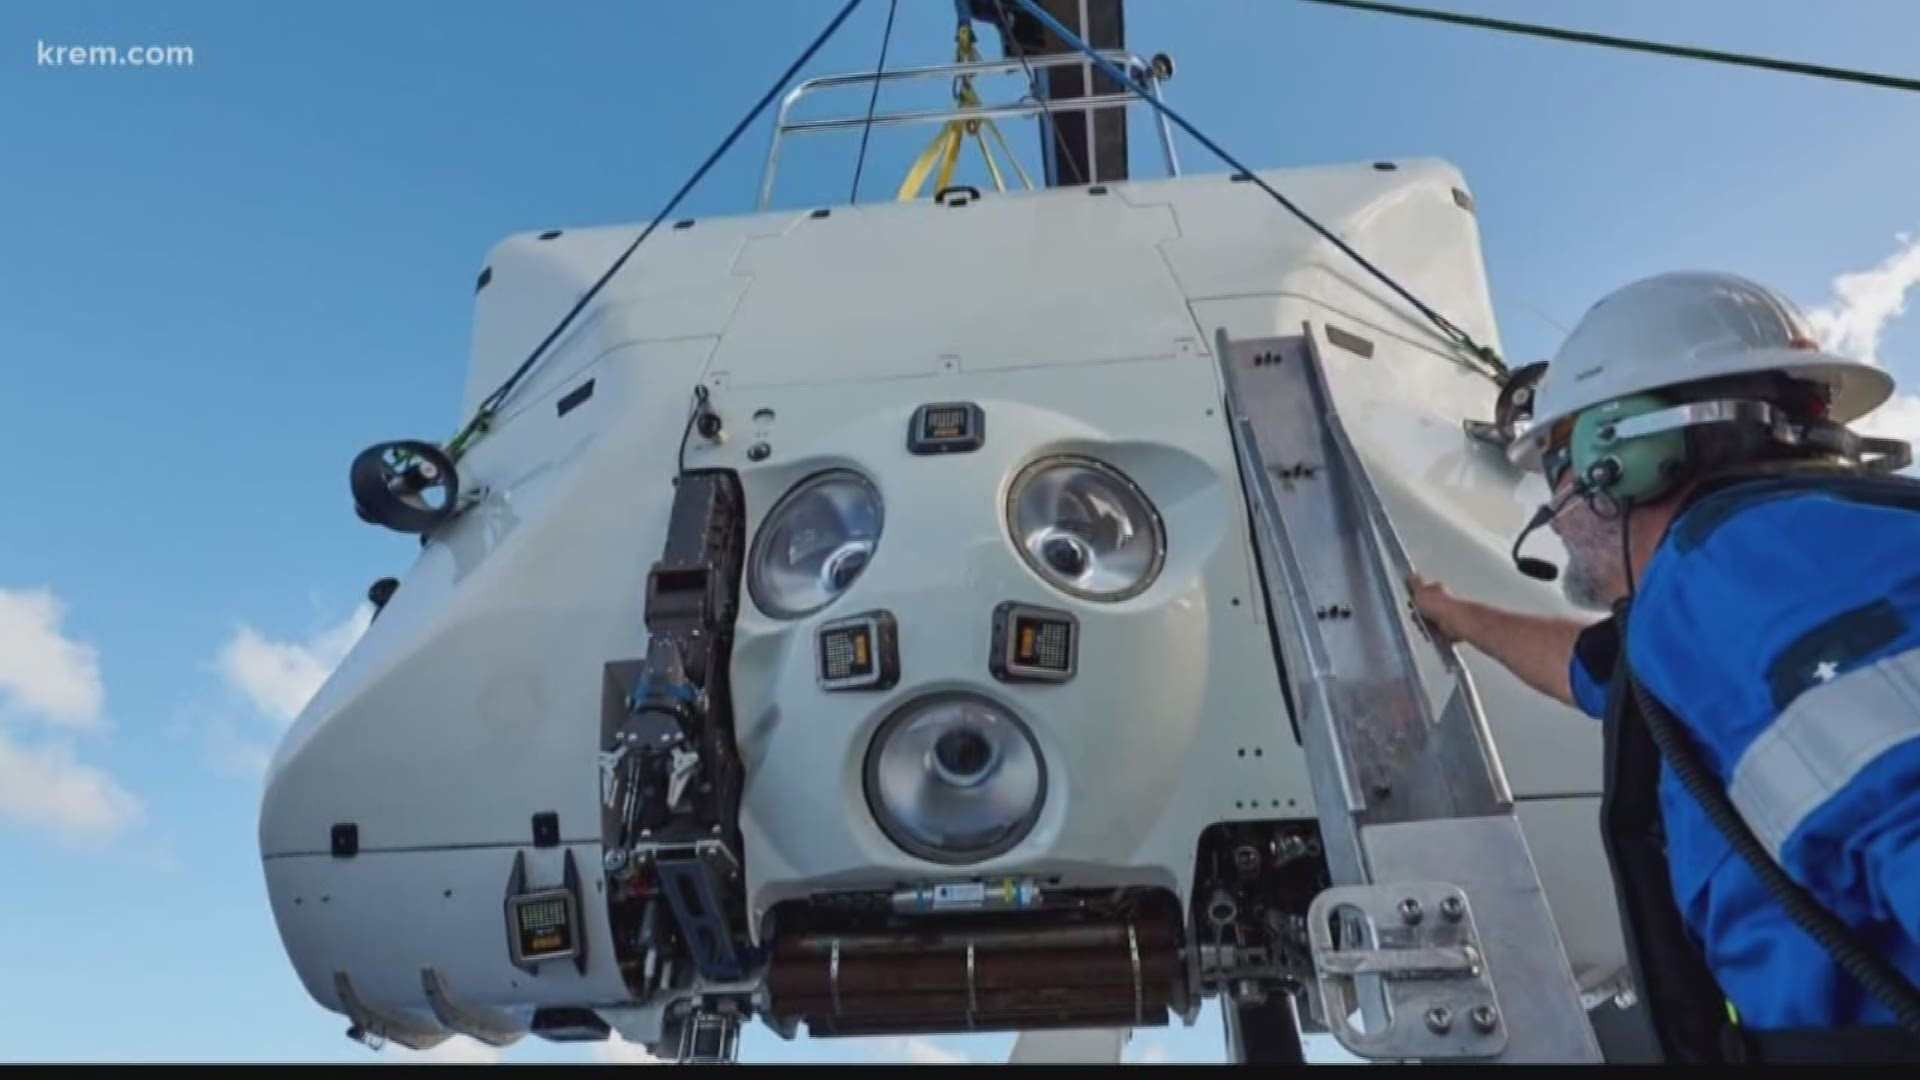 For the last three years, Triton Submarines has traveled to the lowest points of the ocean.